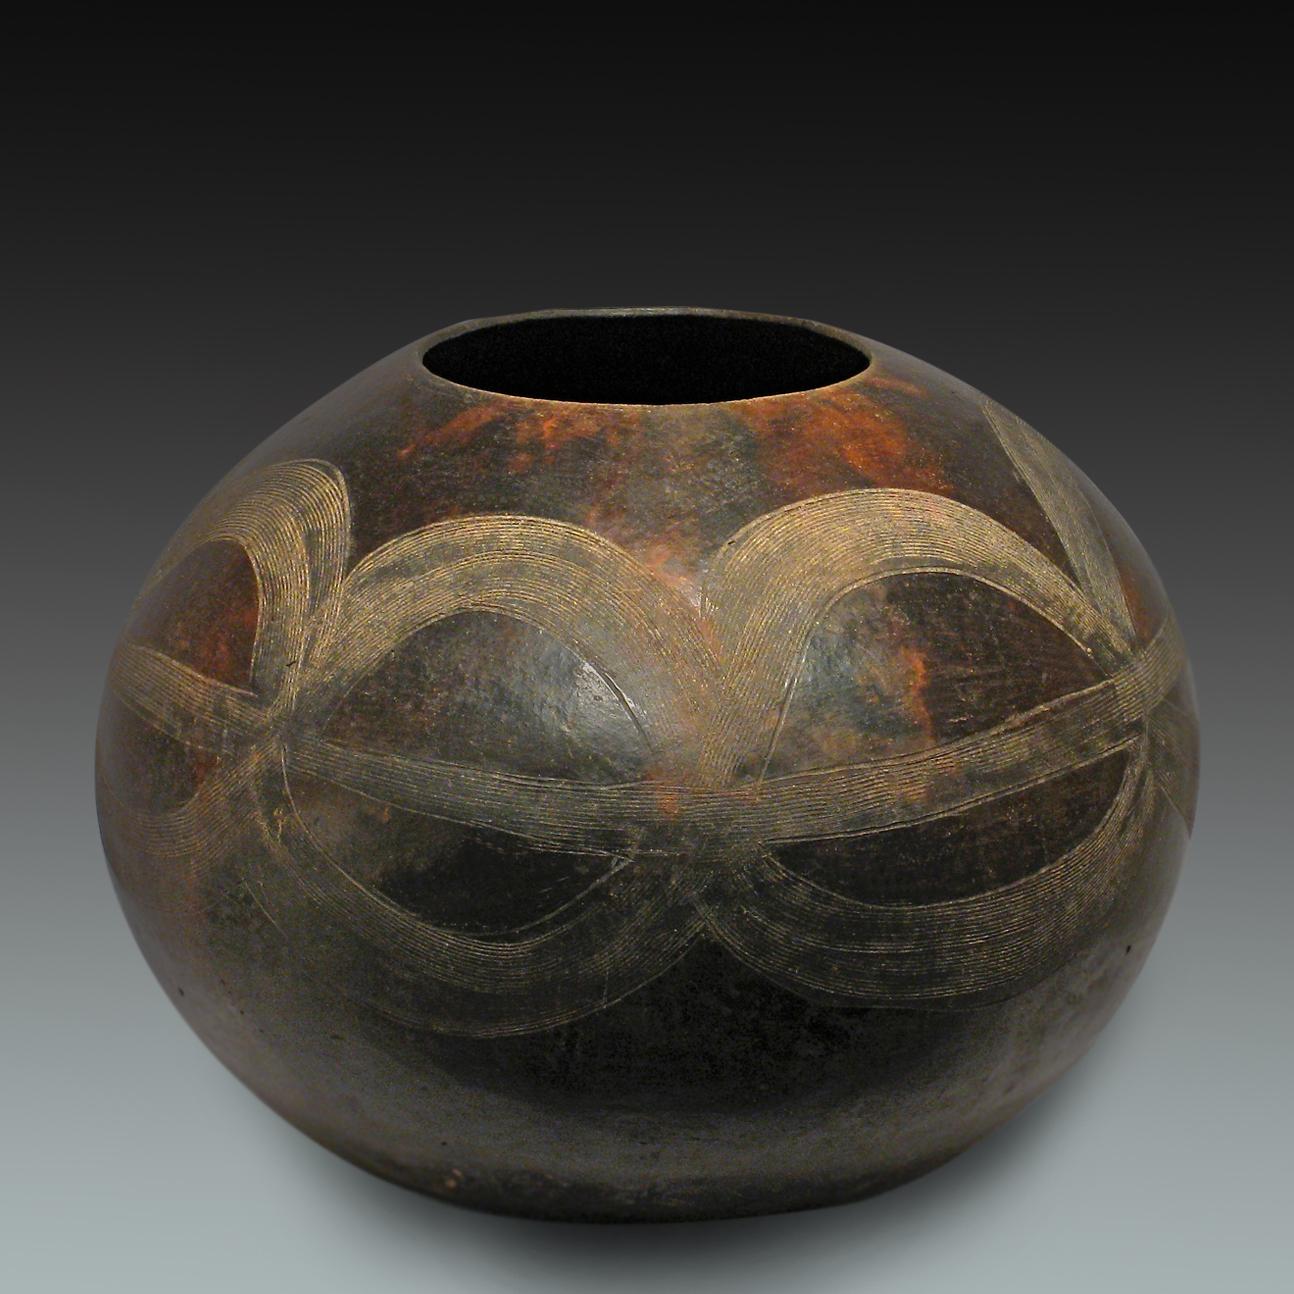 South African Mid-20th Century Tribal African Pot, Zulu Ukhamba, South Africa